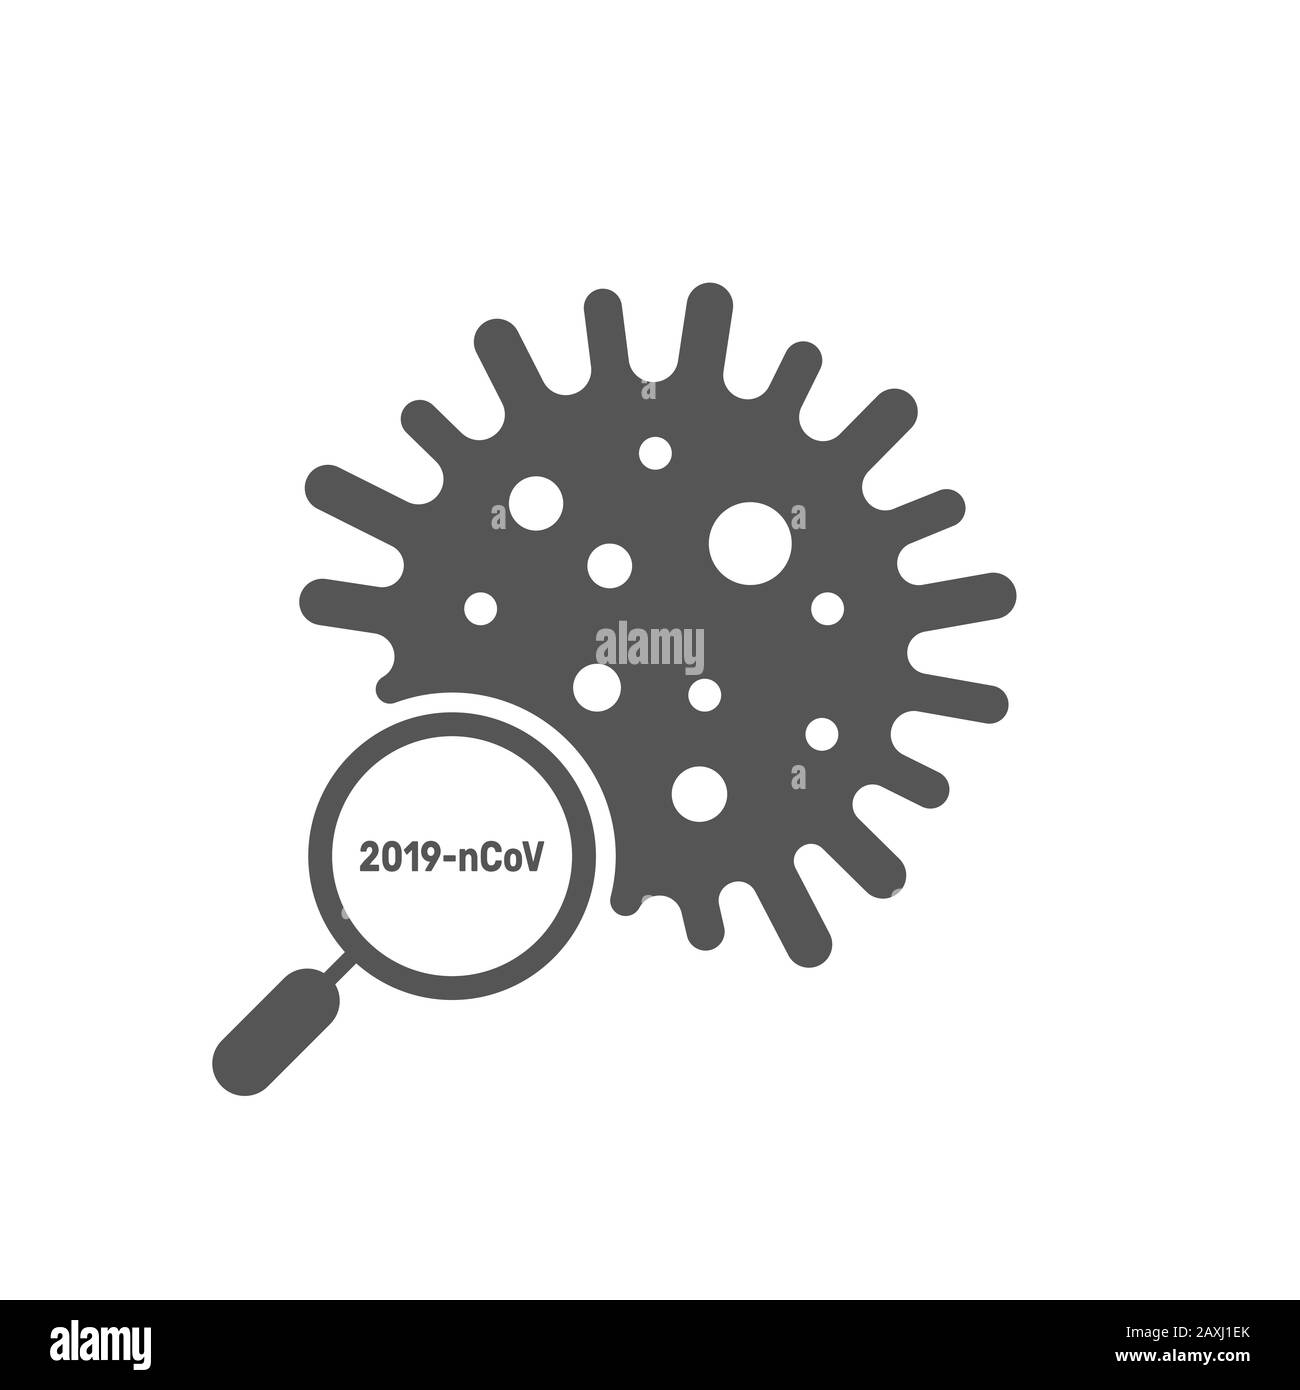 Sign of search and research of coronavirus. Virus recognition. Vector illustration. EPS 10 Stock Vector